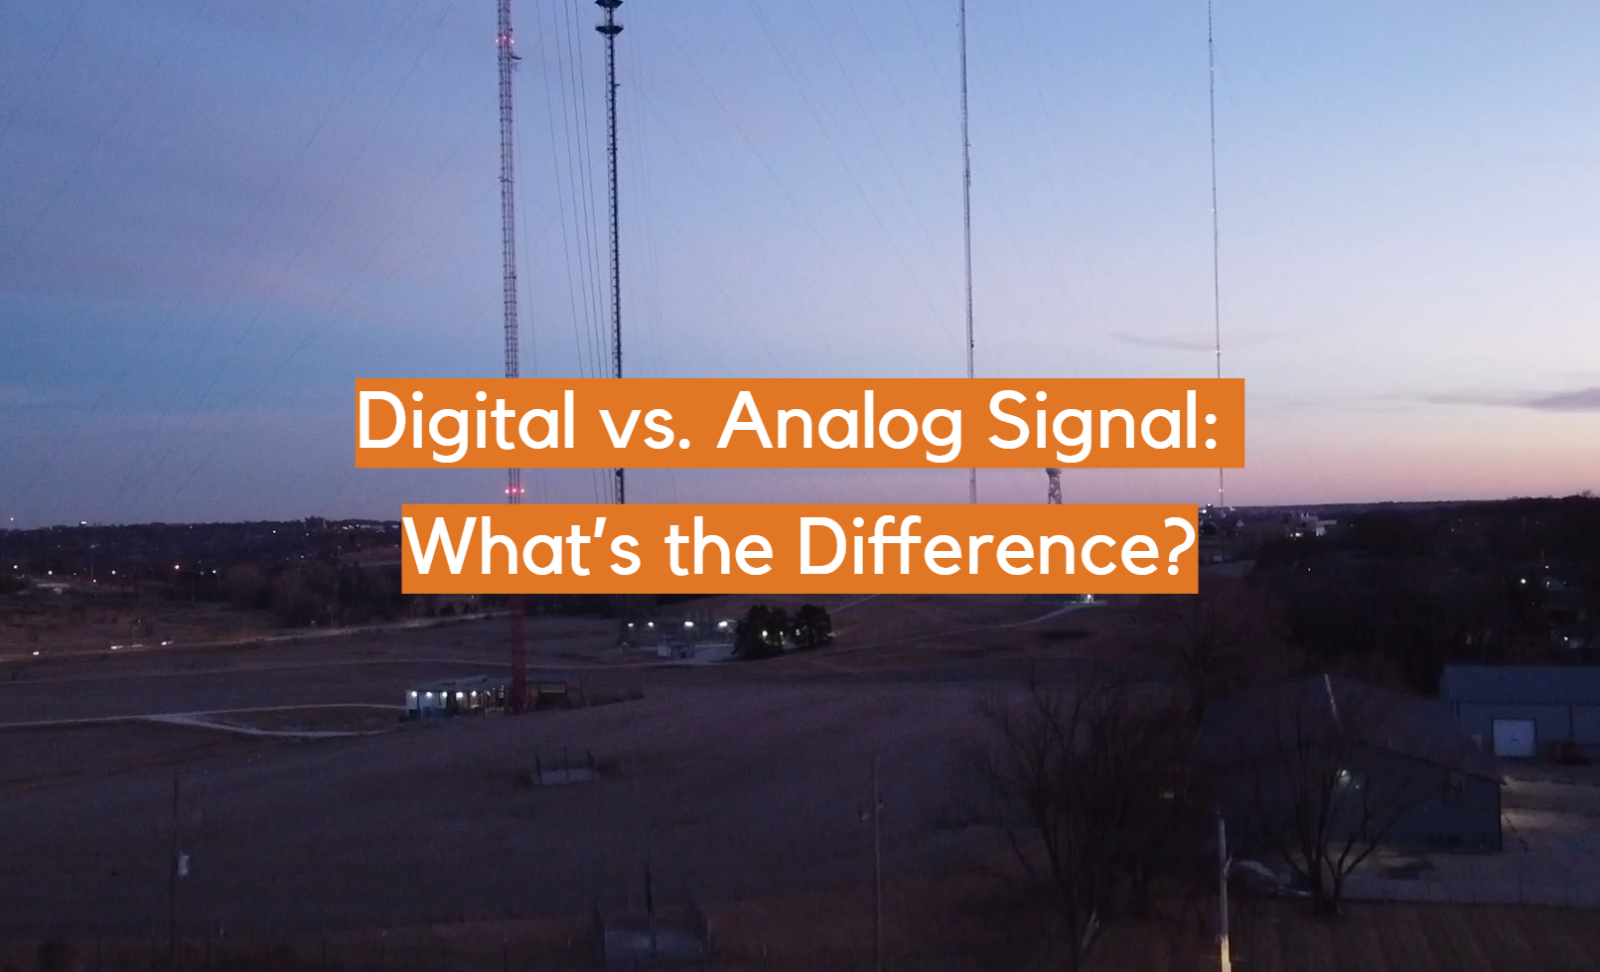 Digital vs. Analog Signal: What’s the Difference?